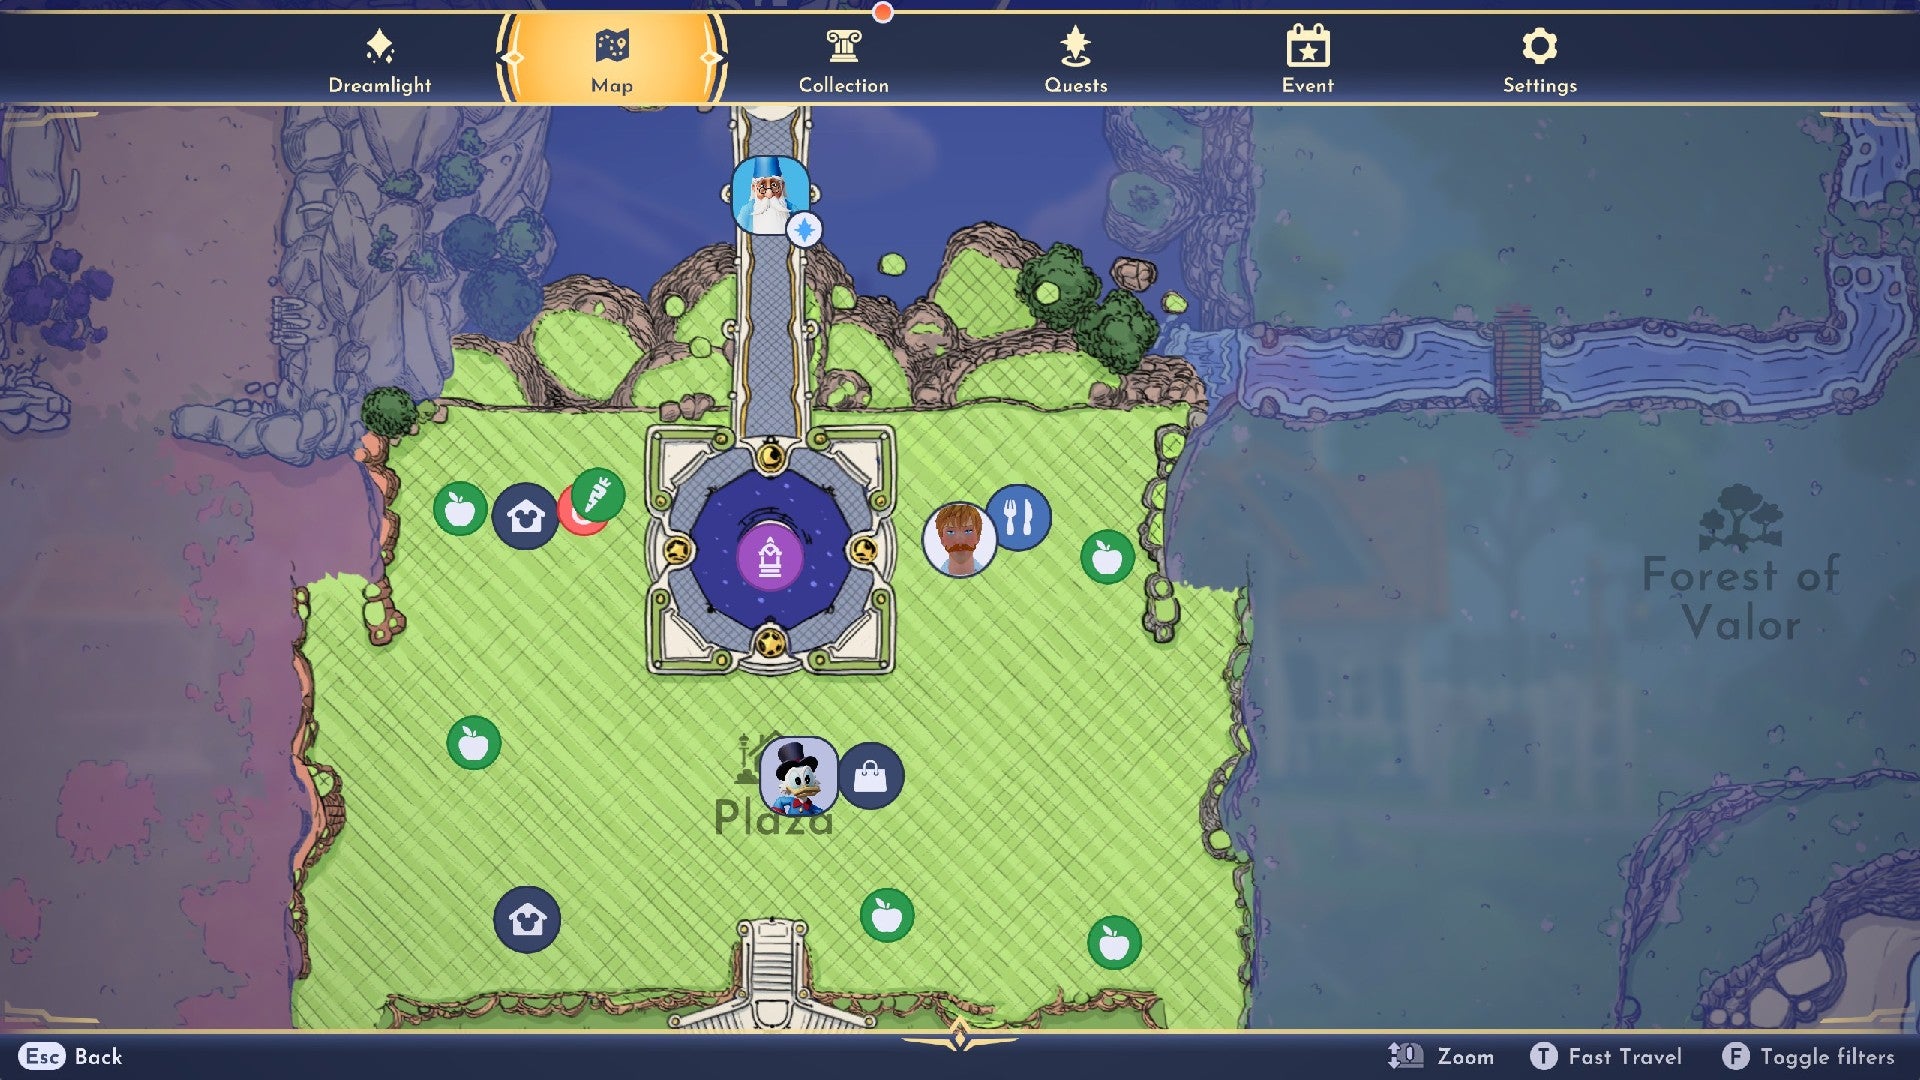 Disney Dreamlight Valley screenshot showing various icons in the Plaza, with the player located by Chez Remy in the top-right corner.